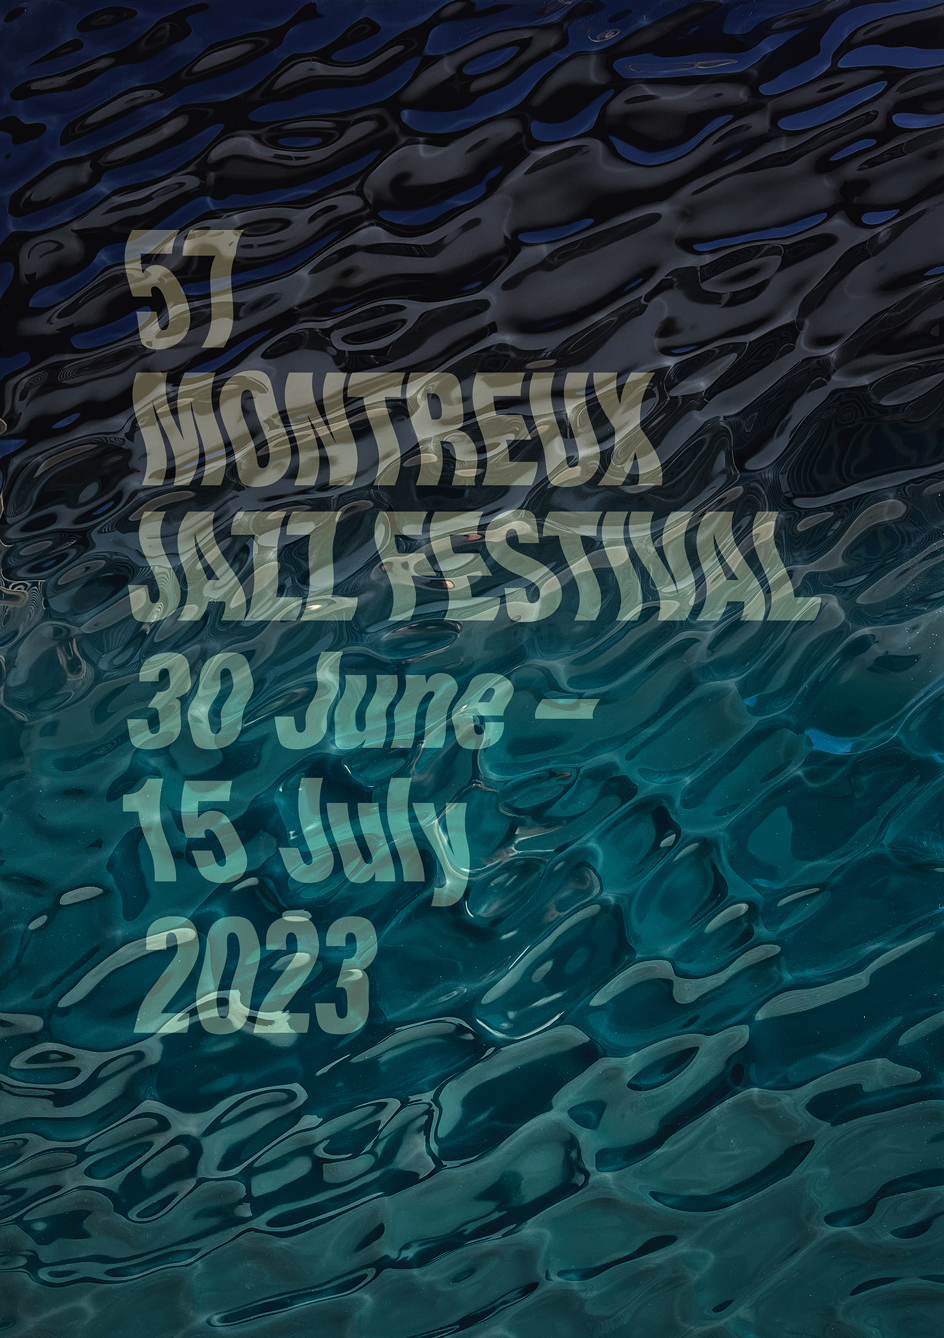 Montreux Jazz Festival posters: a visual history | Wallpaper